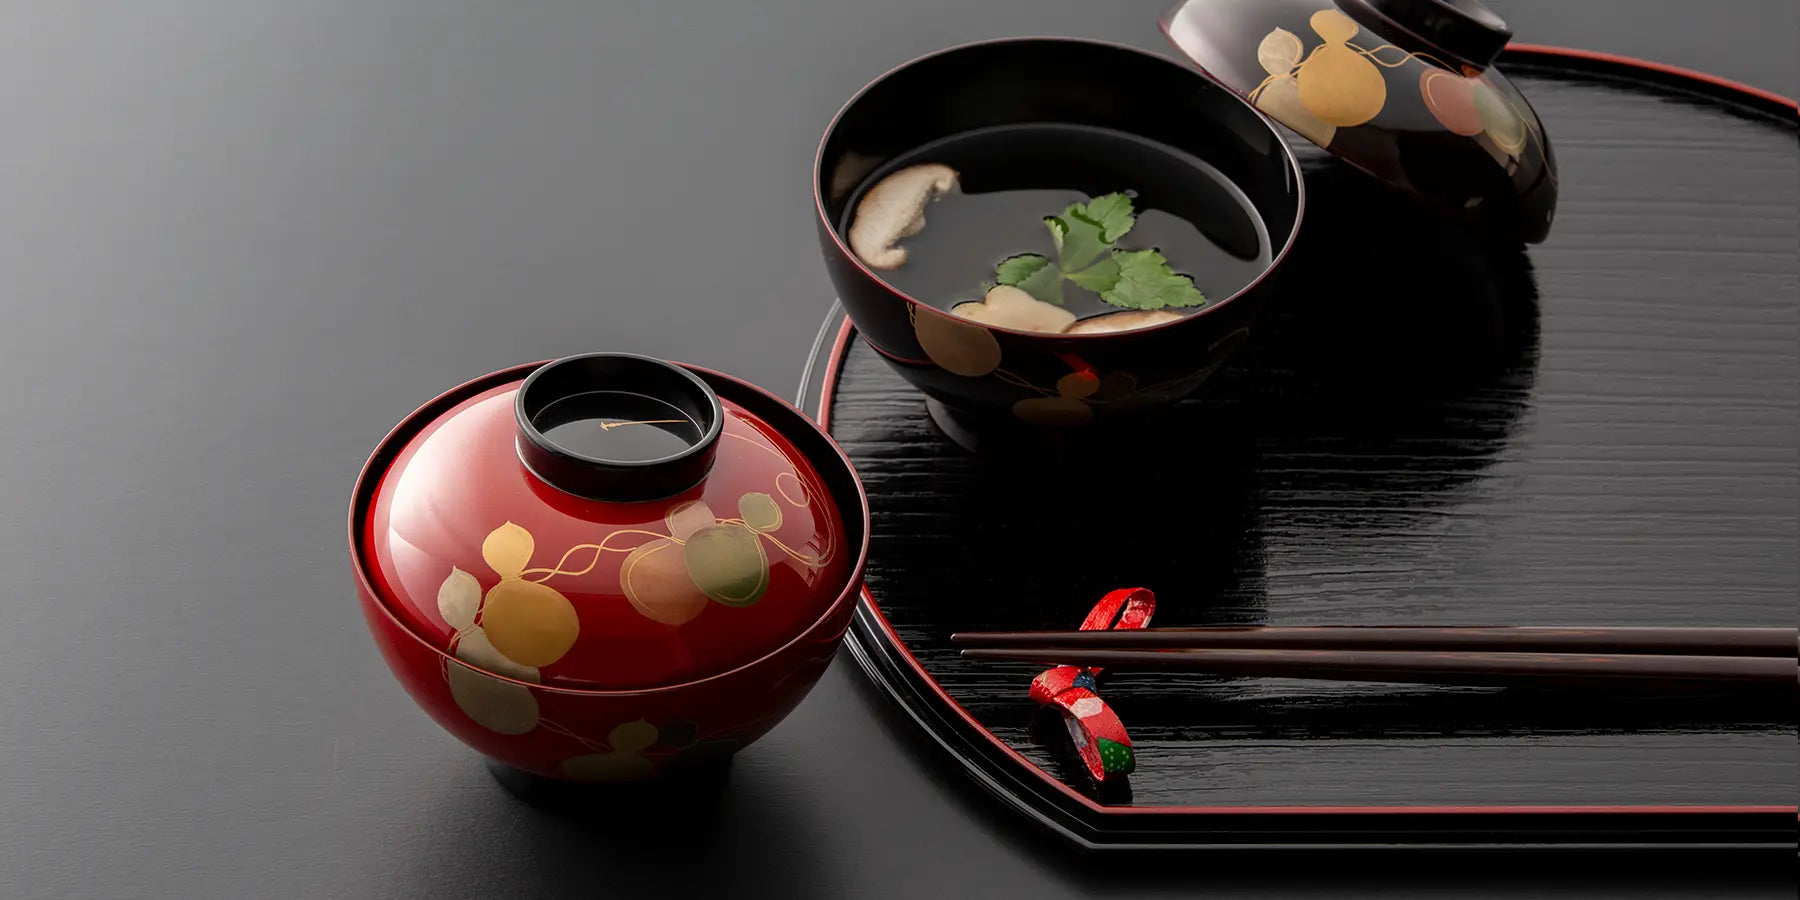 Discover our great selection of Soup Bowls at Globalkitchen Japan.